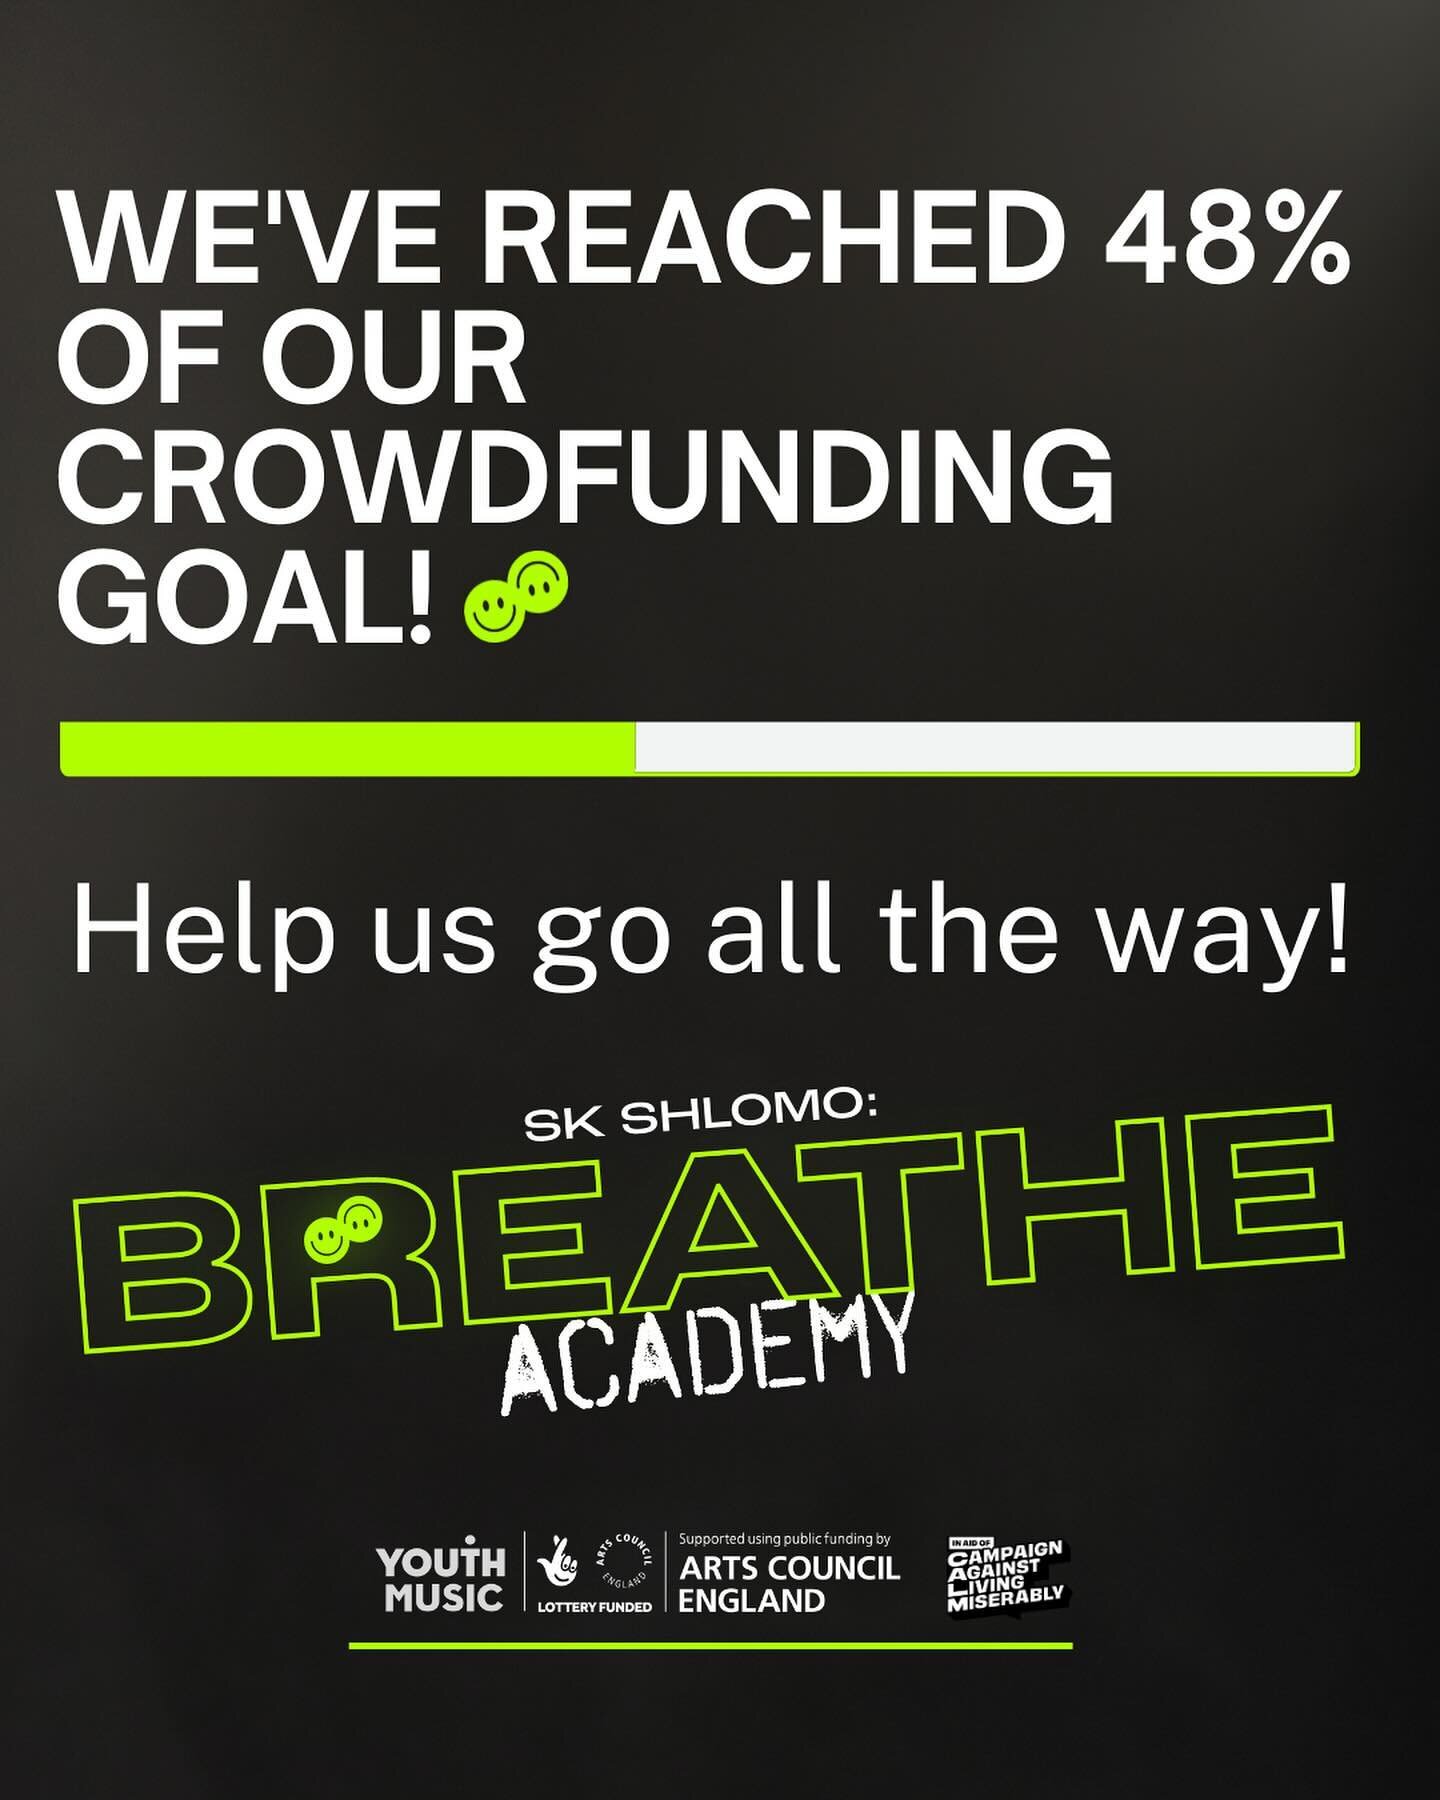 ✨Exciting news: thanks to you, we've reached 48% of our crowdfunding goal! 🎉 But can we hit 60% in the next 24 hours? 🚀 This is to support BREATHE Academy - a safe space for young minds to explore creativity and combat life's challenges 🌈&nbsp;✨

